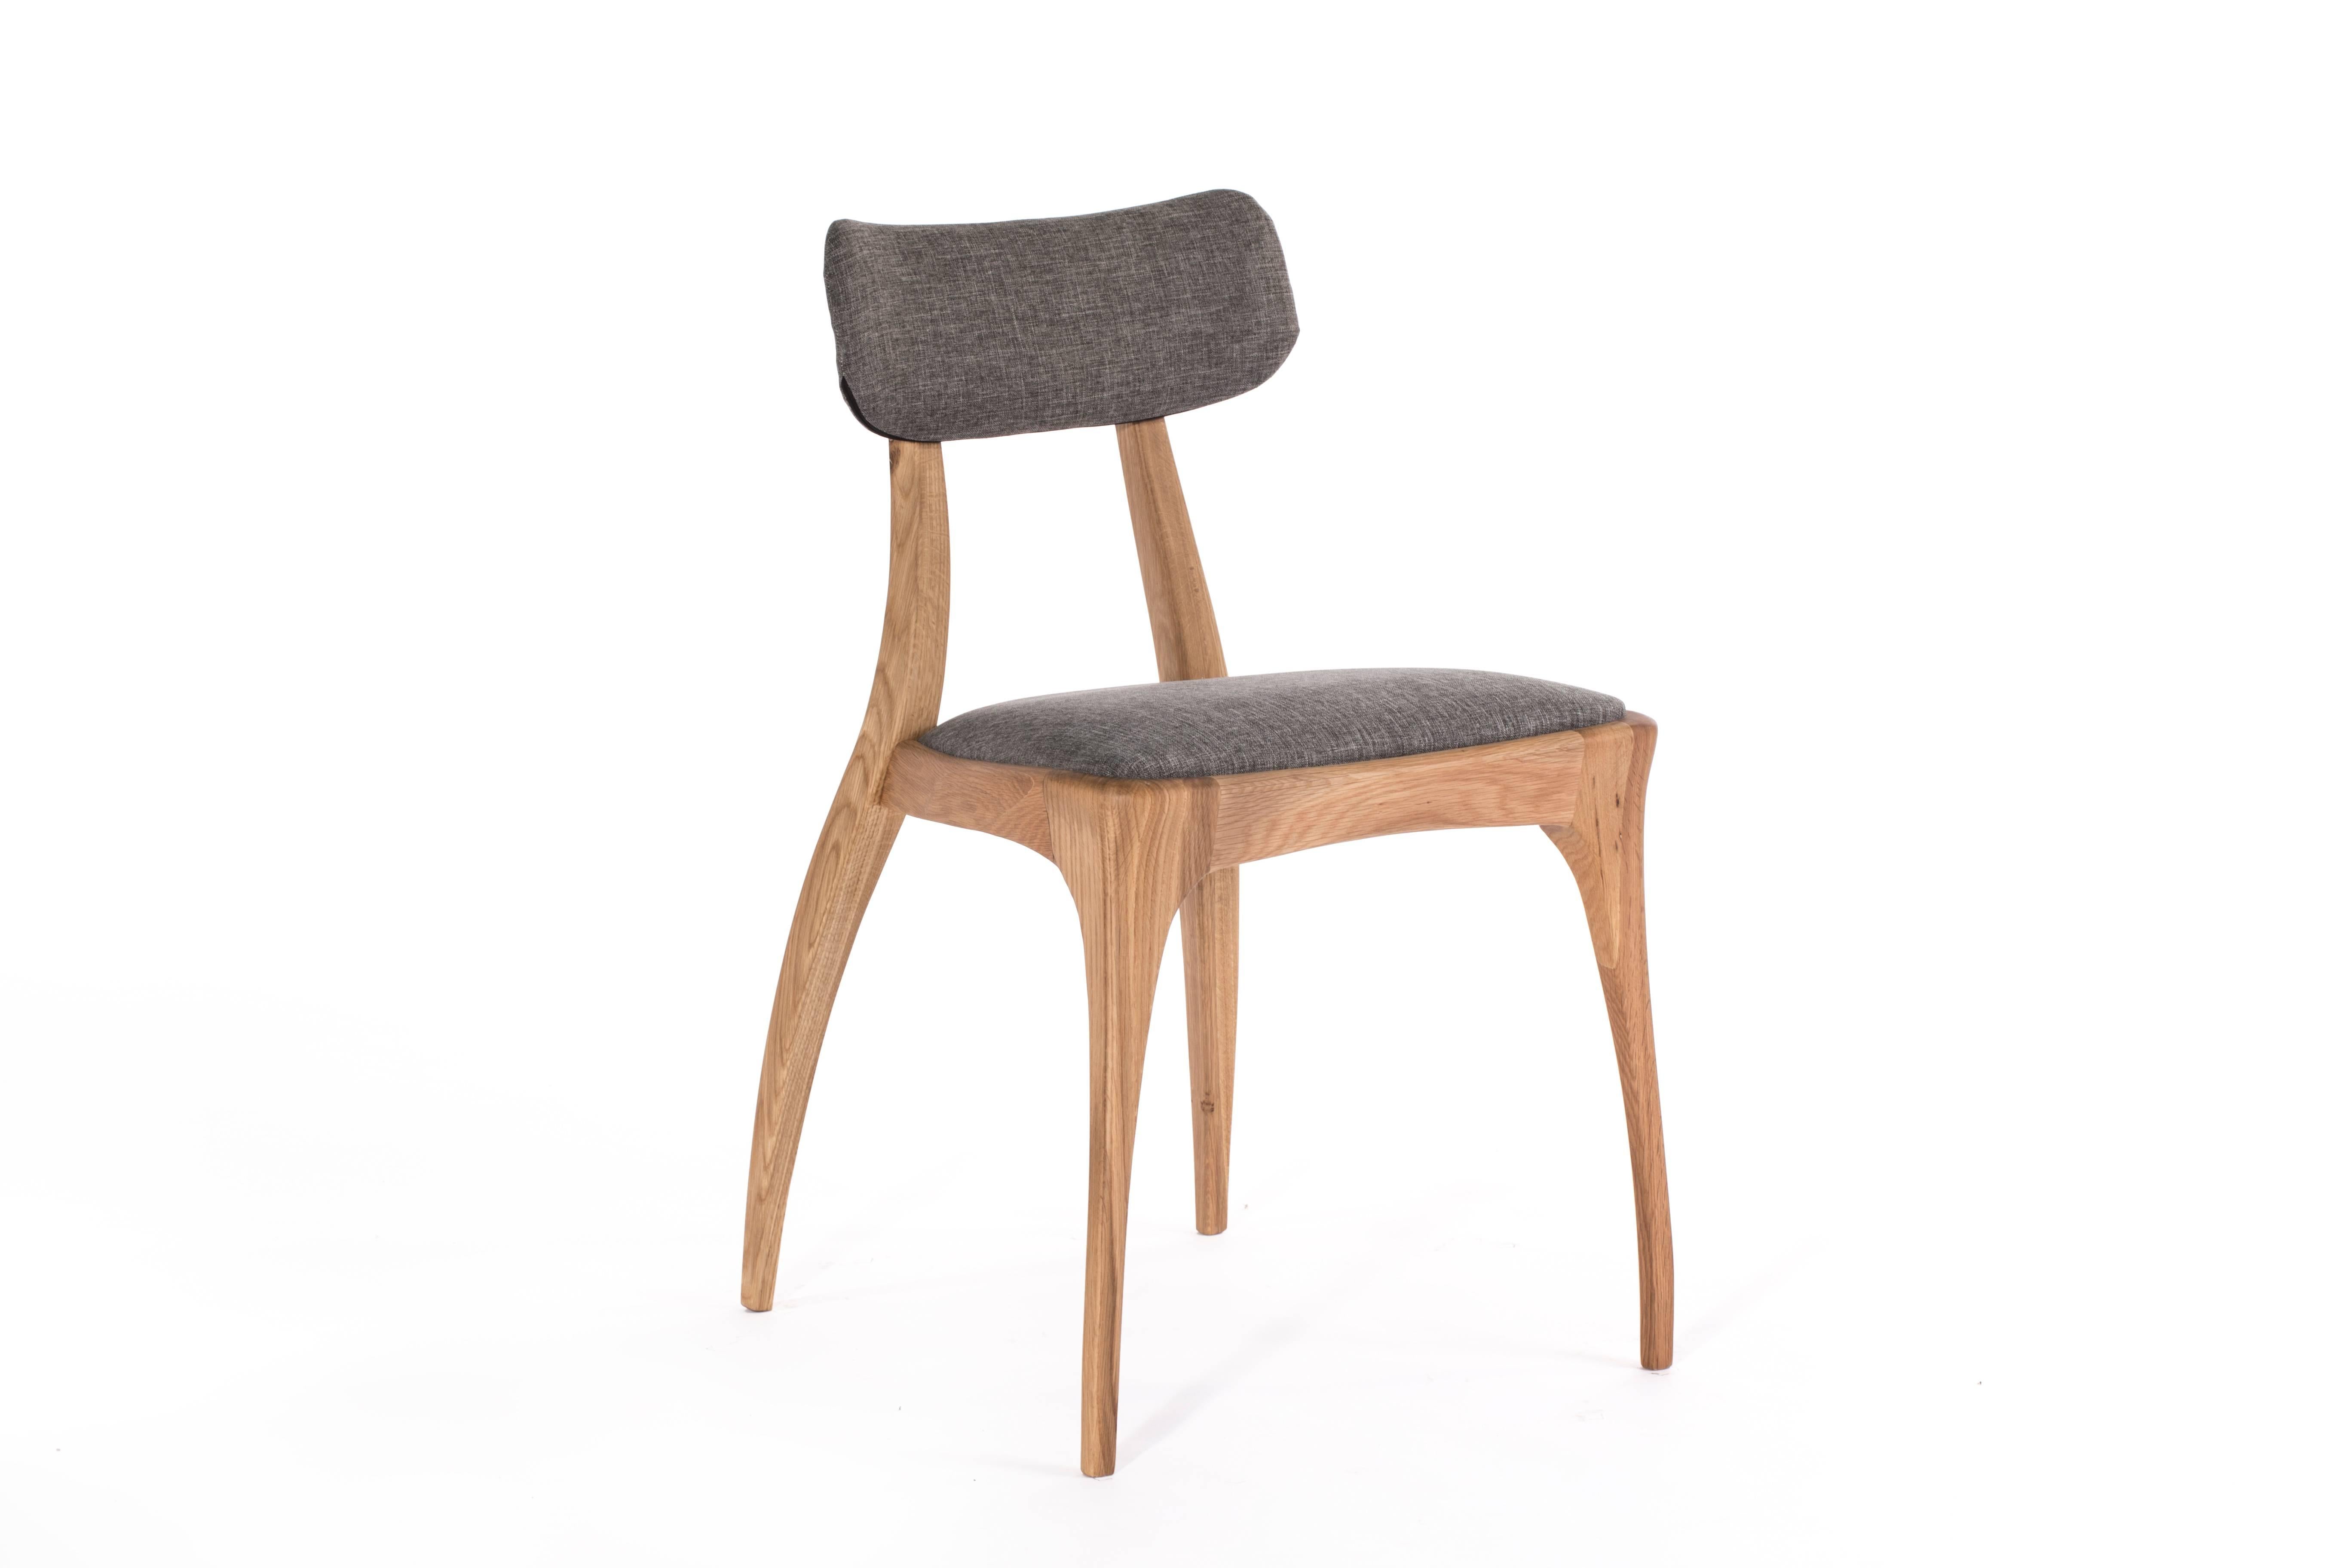 Pair of European modern walnut or oak upholstered dining chairs. Option of oak or walnut frame.

Minimum order quantity: Two (Packed two in a box).